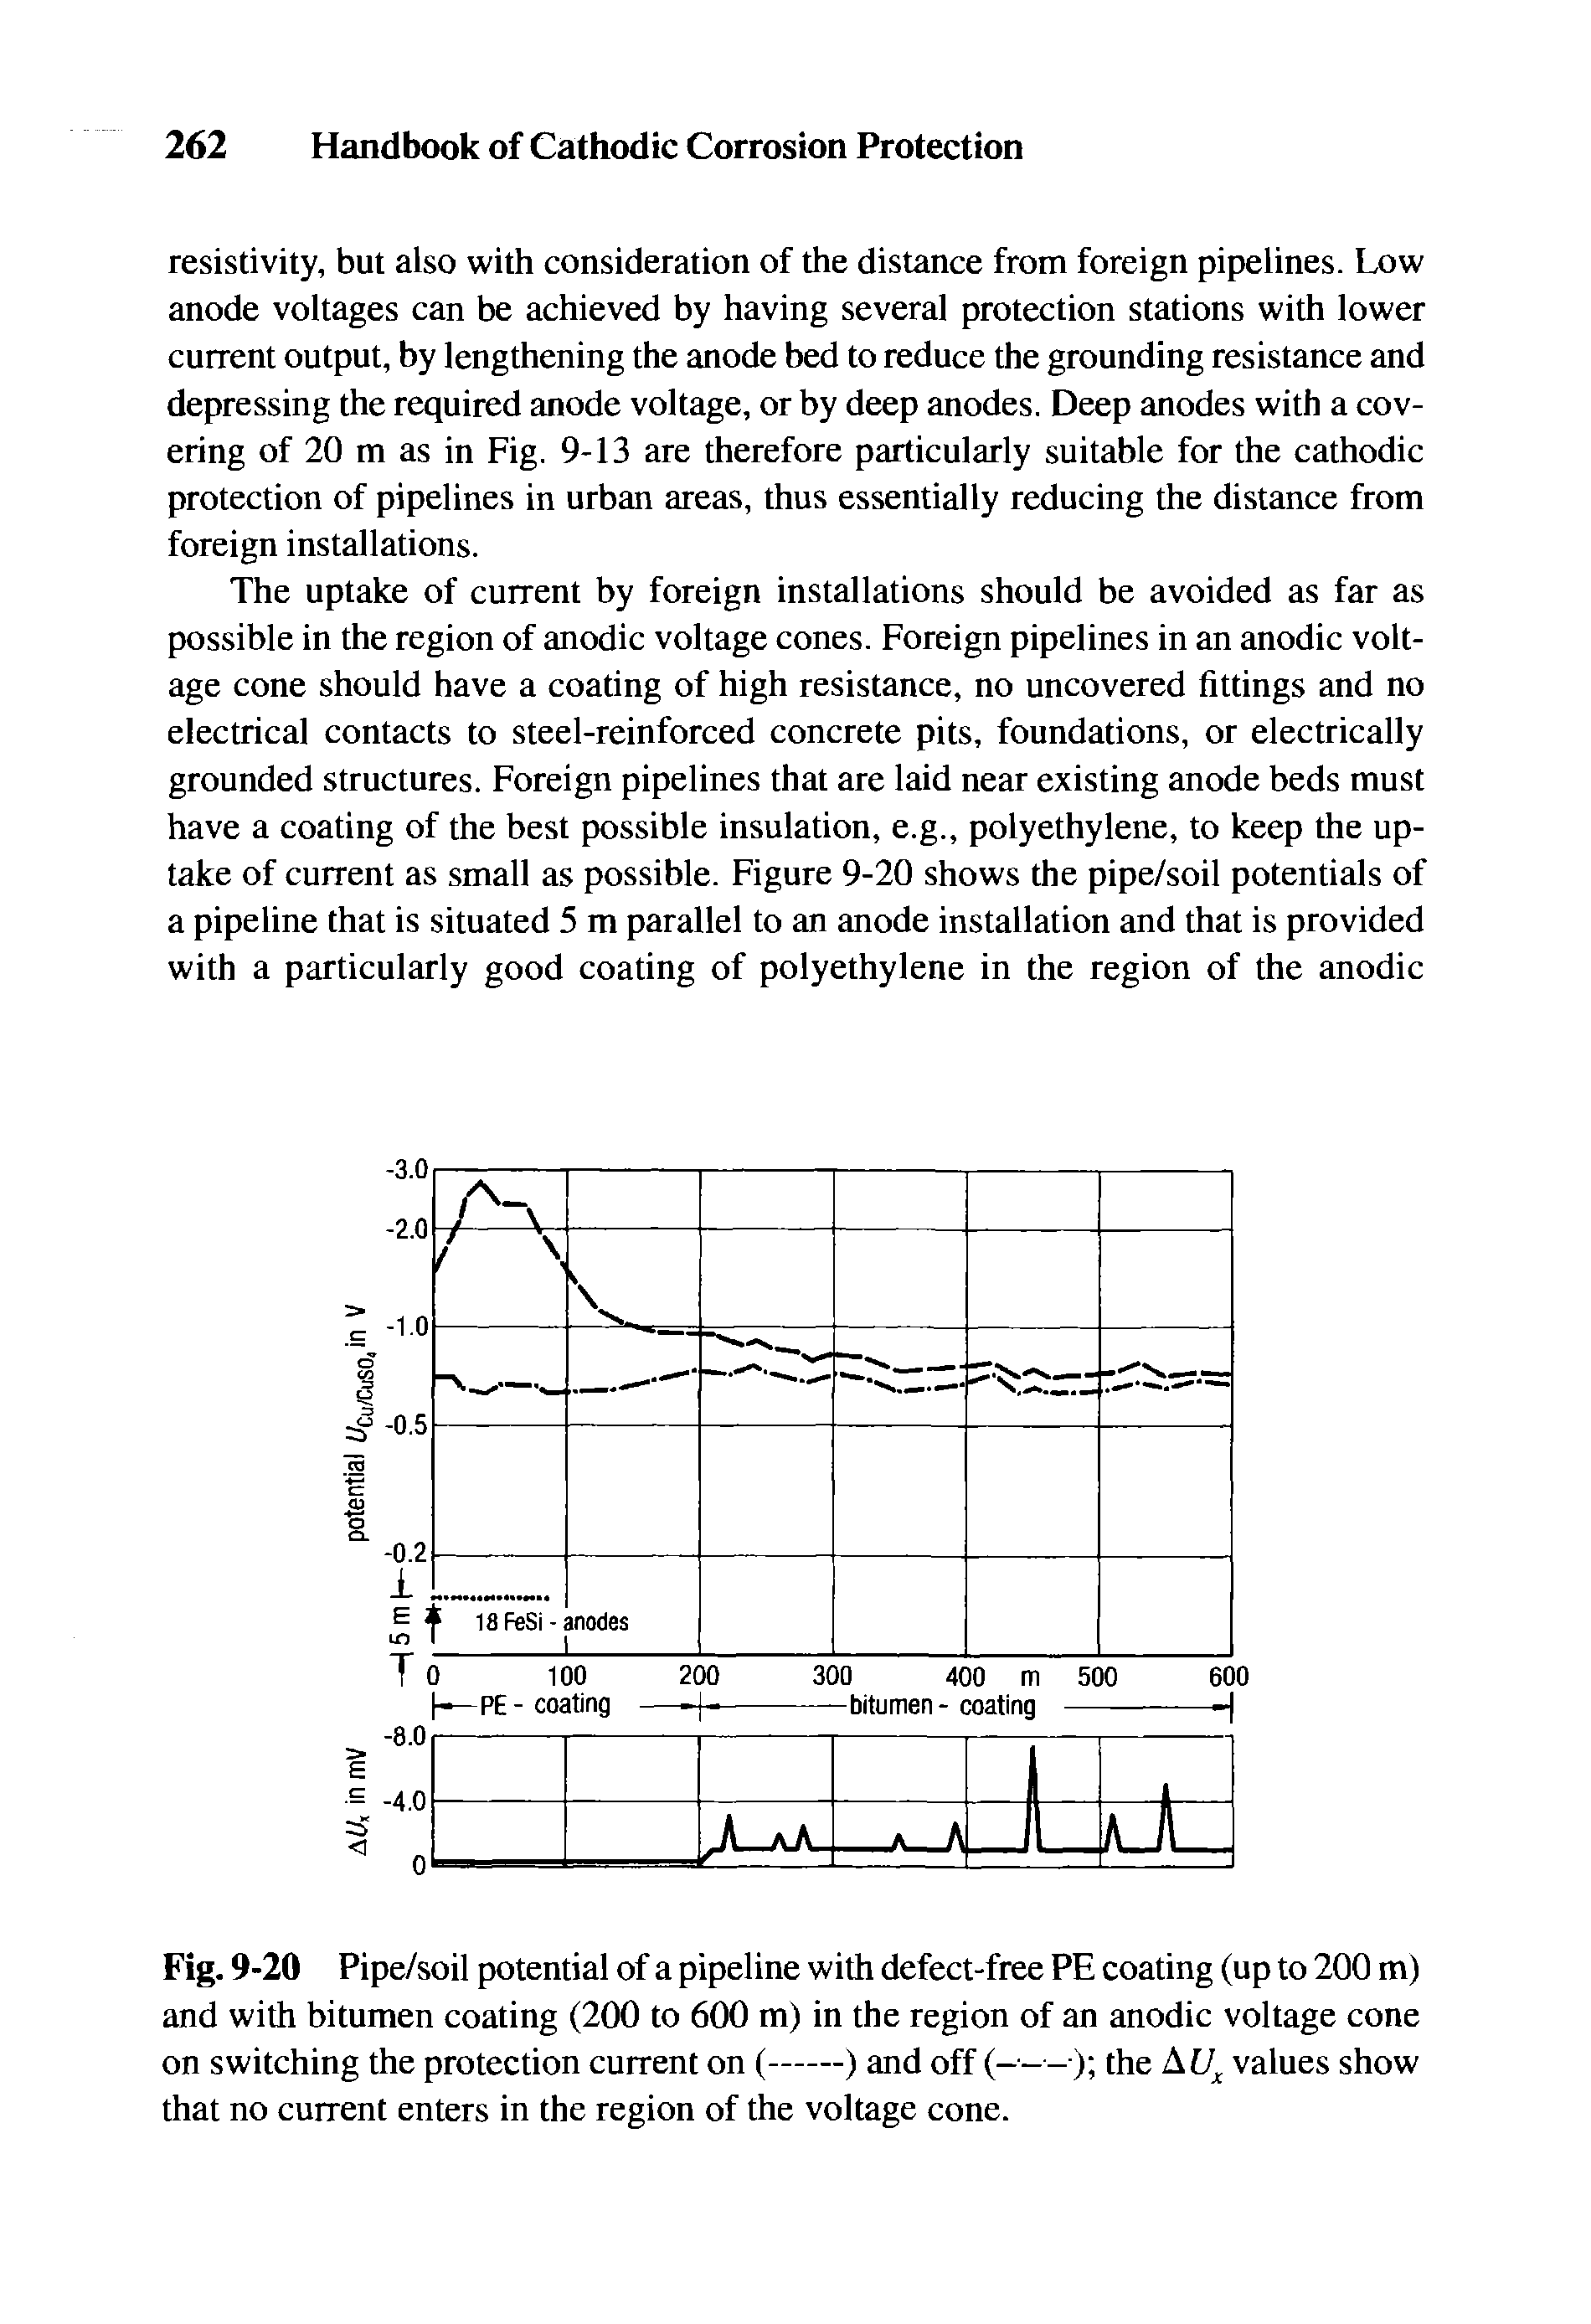 Fig. 9-20 Pipe/soil potential of a pipeline with defect-free PE coating (up to 200 m) and with bitumen coating (200 to 600 m) in the region of an anodic voltage cone...